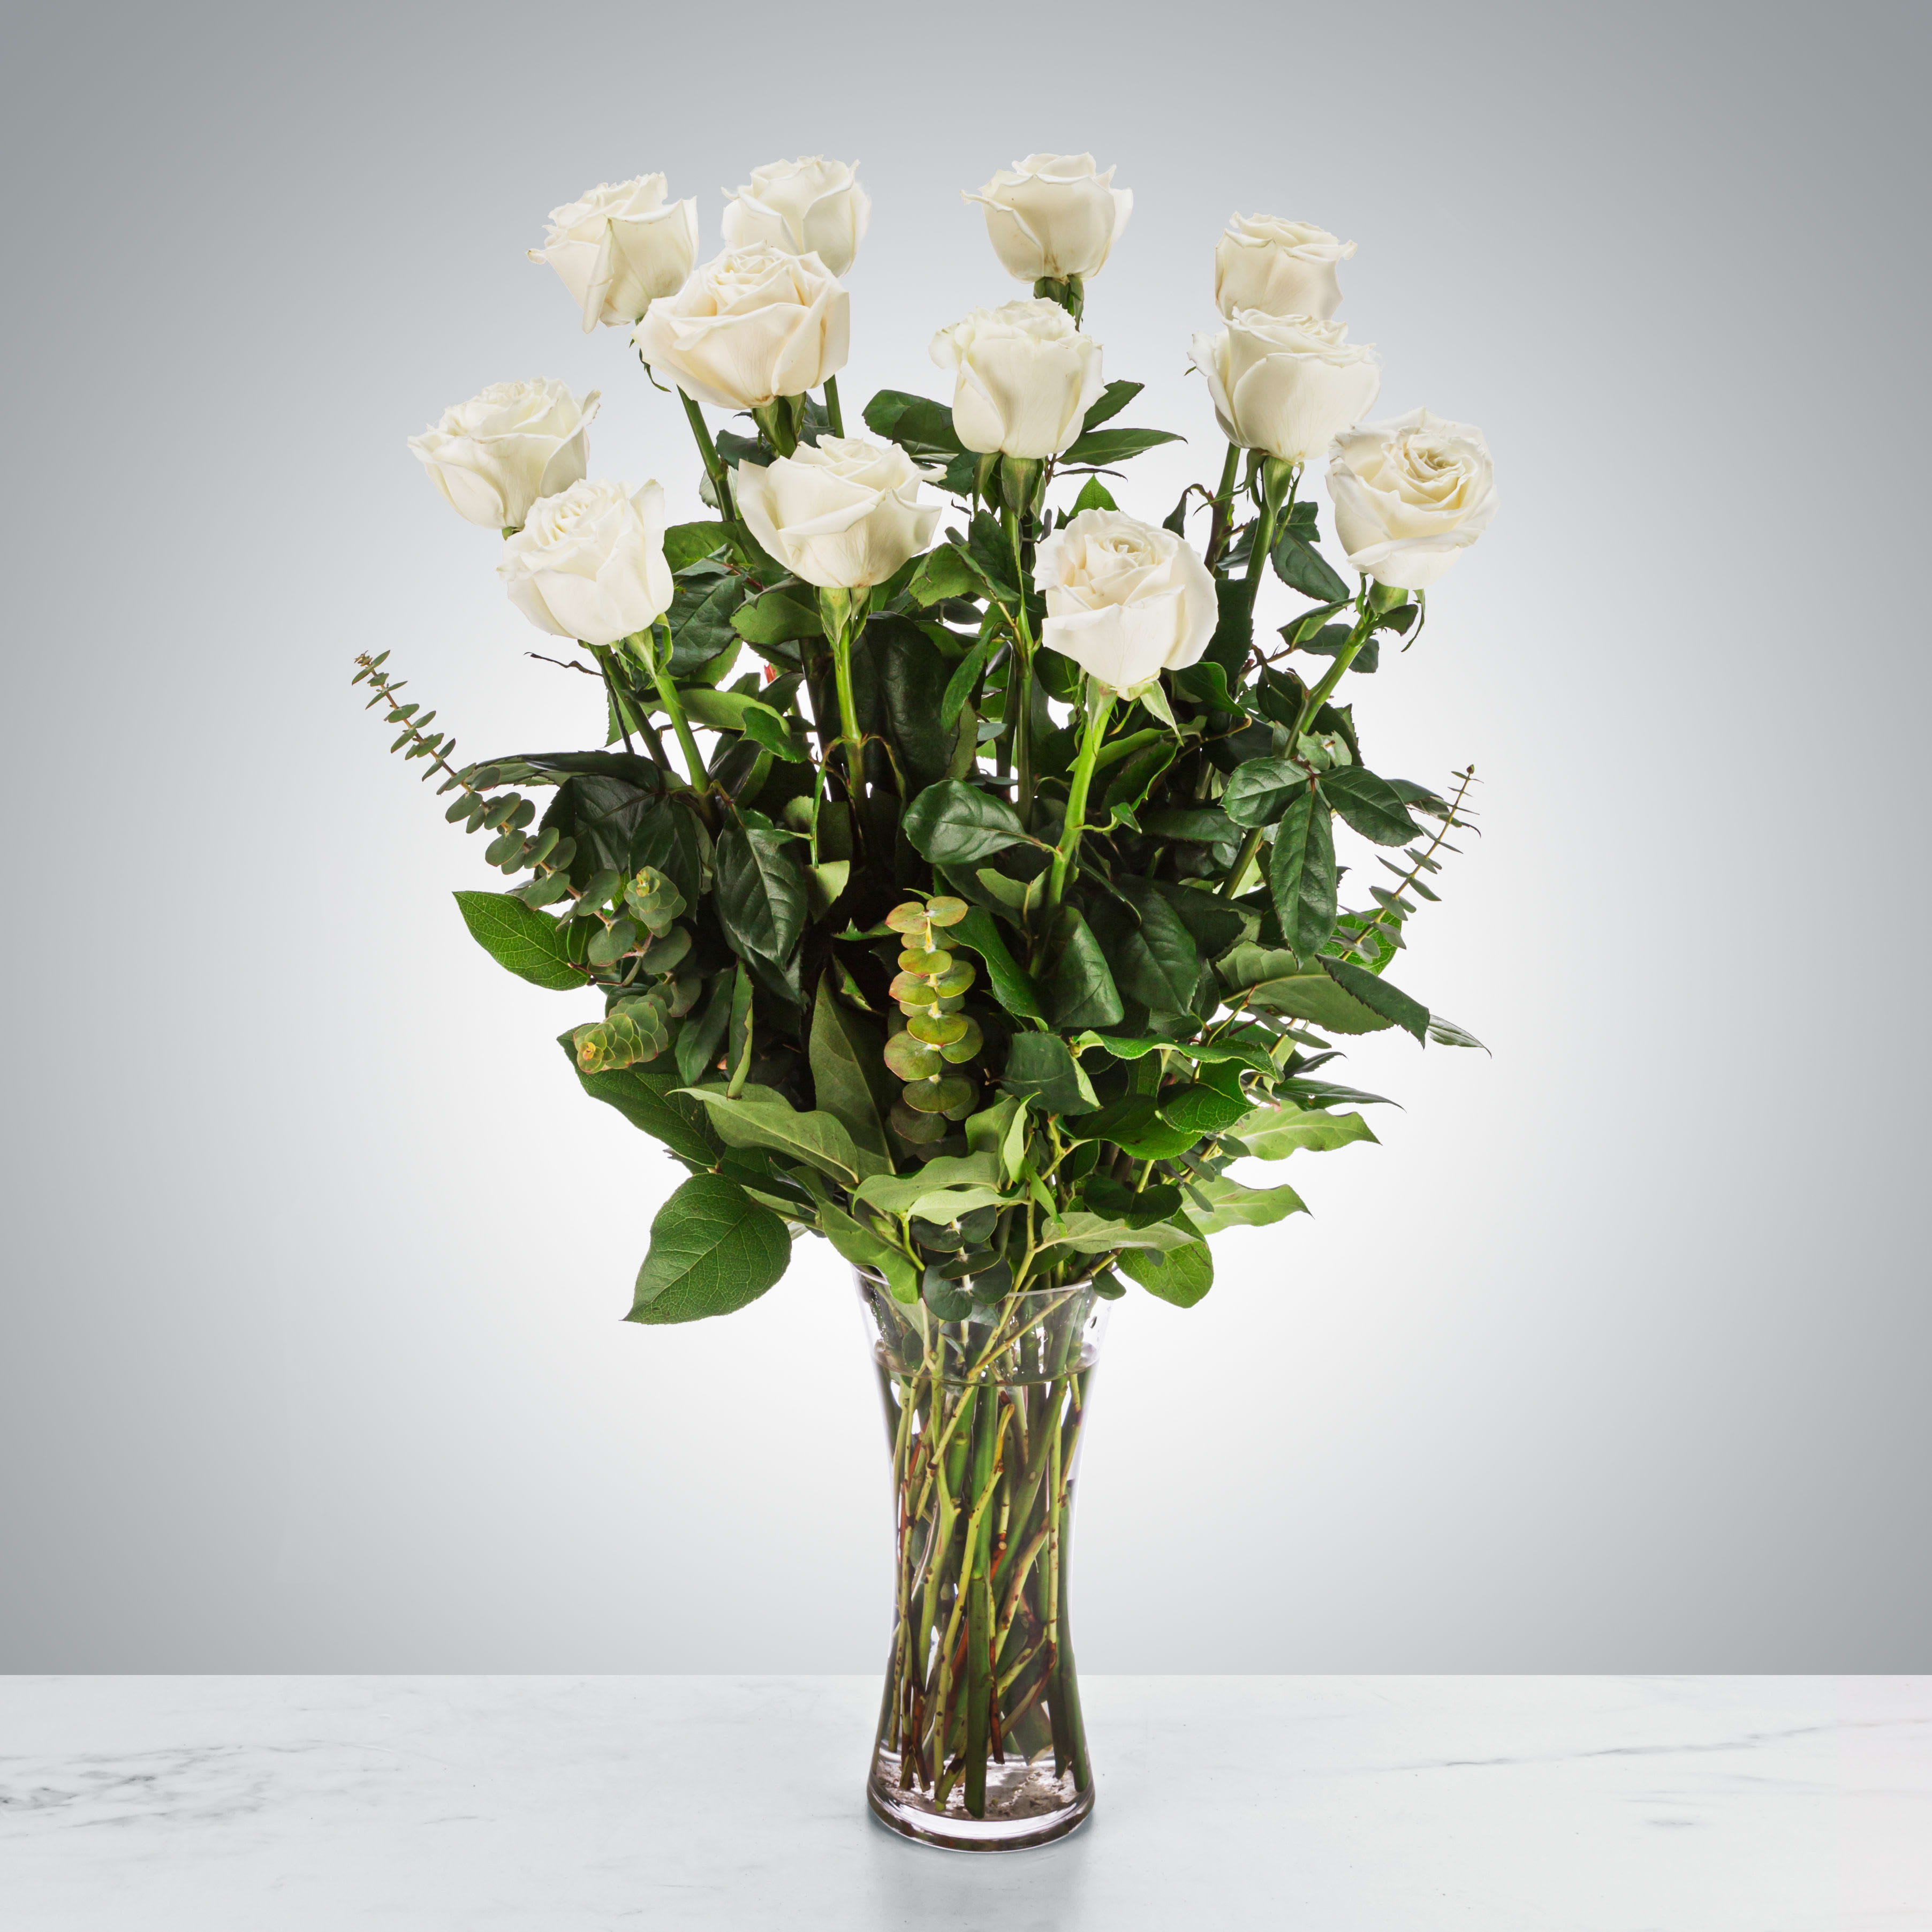 Dozen Long Stem White Roses by BloomNation™ - A dozen white roses are a classic gift! Perfect for Valentine's Day, an Anniversary, or any type of celebration. Other rose colors also available.24 Hour notice required to assure white or any other color is in stock. Please leave note in special instruction box at checkout. Approximate Dimensions: 20&quot;D x 30&quot;H